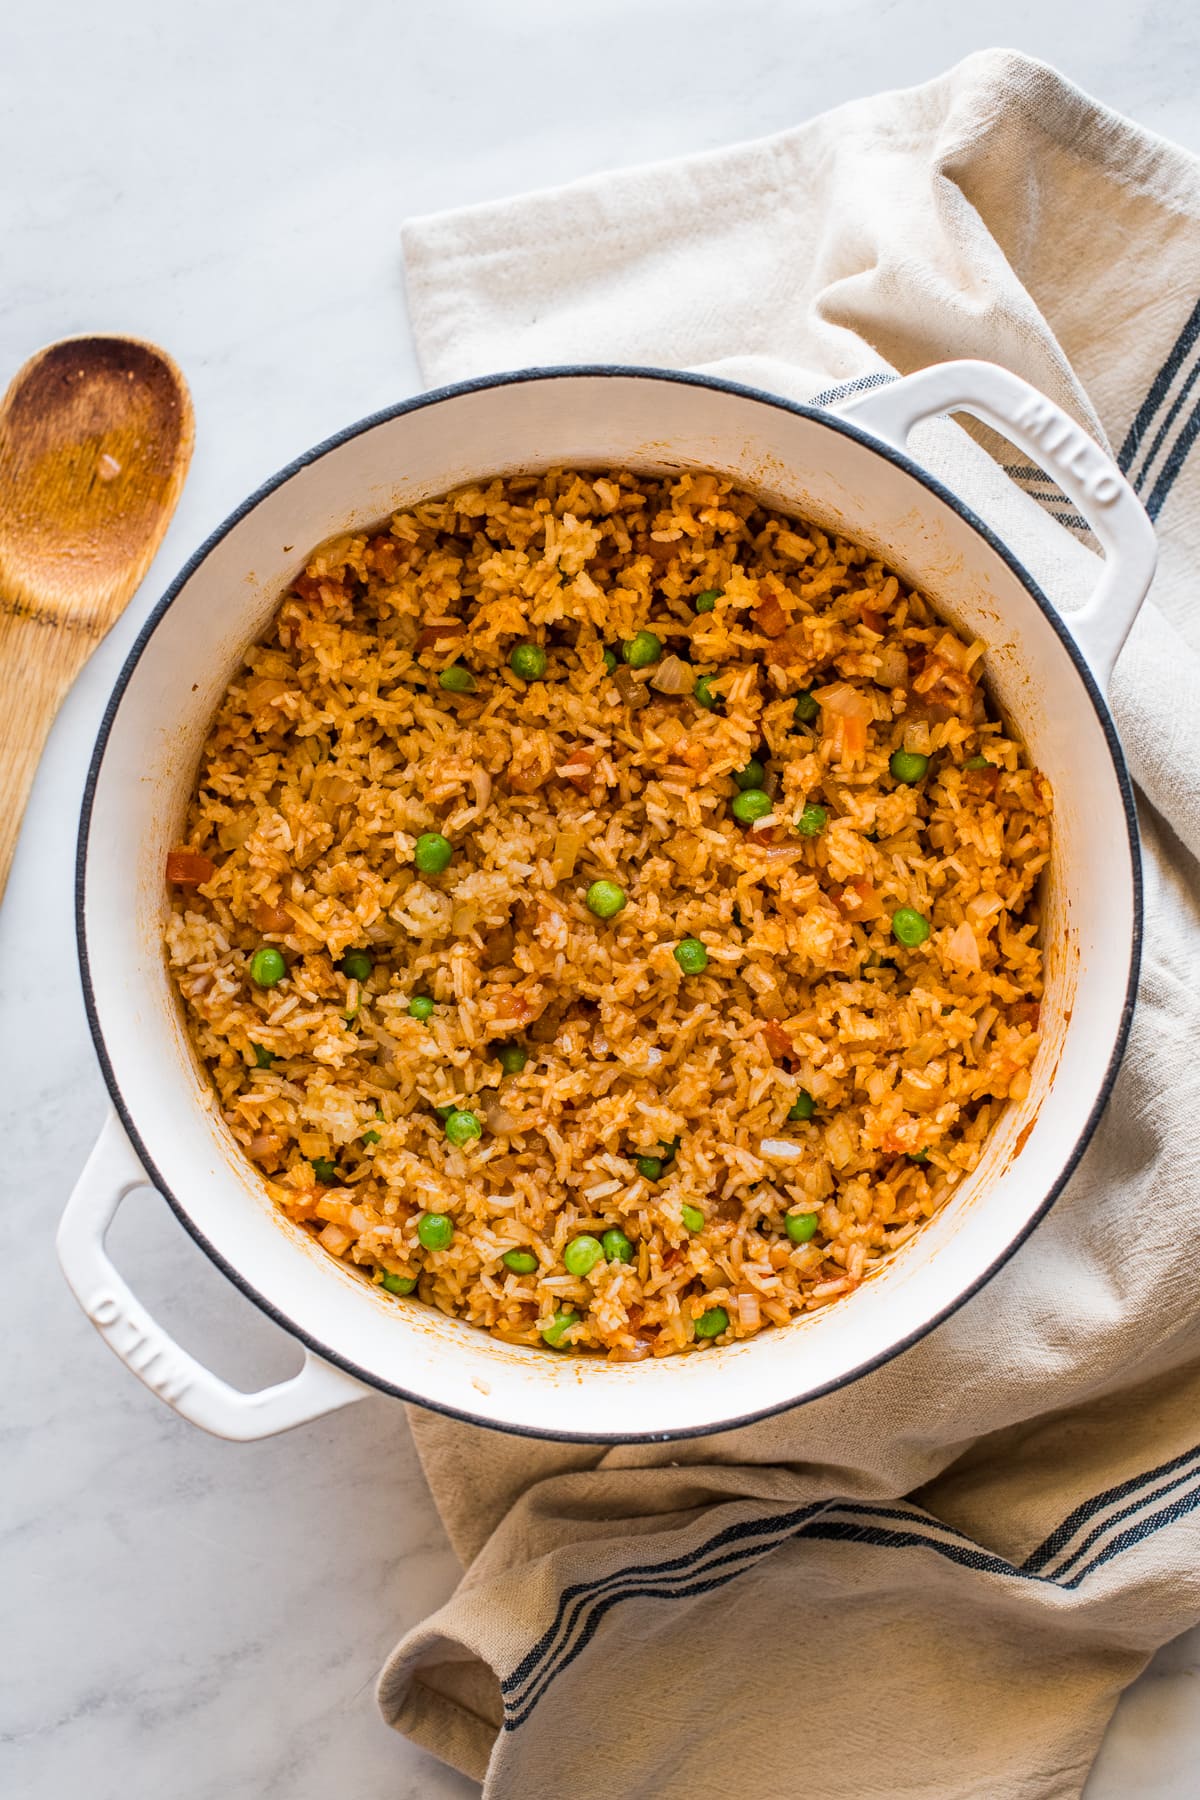 https://www.isabeleats.com/wp-content/uploads/2022/10/mexican-rice-2-small-7.jpg